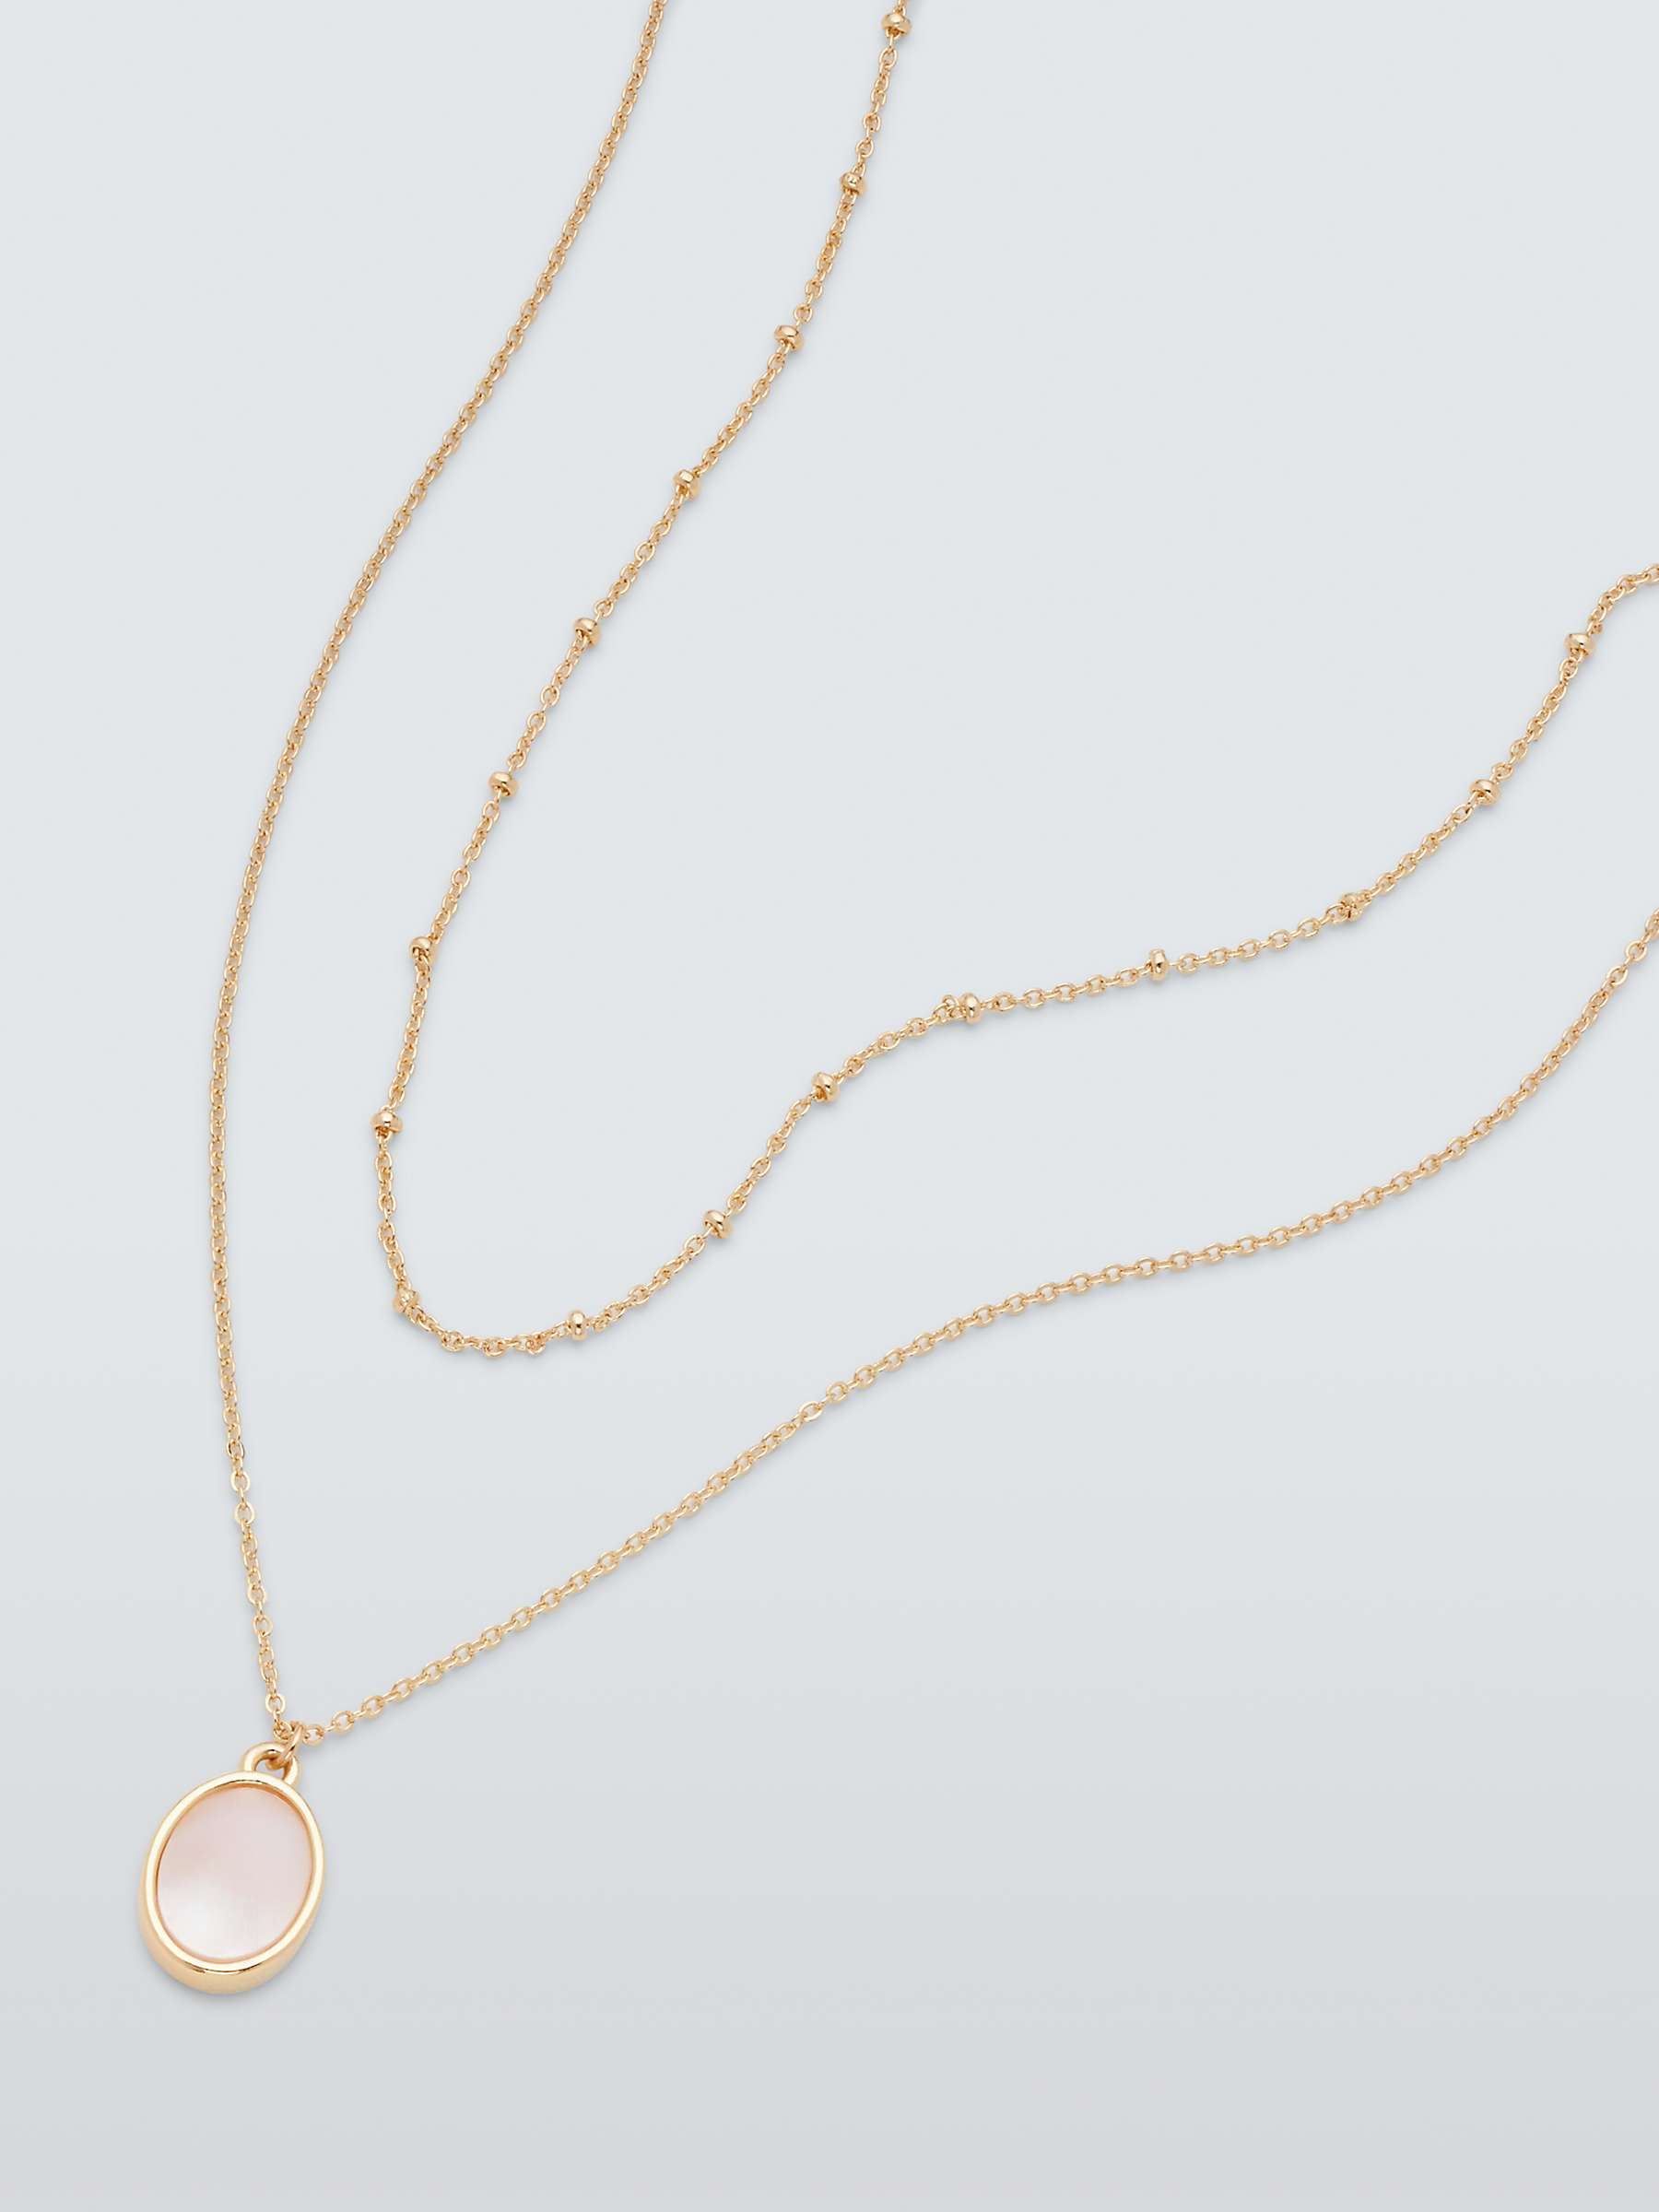 Buy John Lewis Oval Pendant Layered Necklace, Gold/Natural Online at johnlewis.com